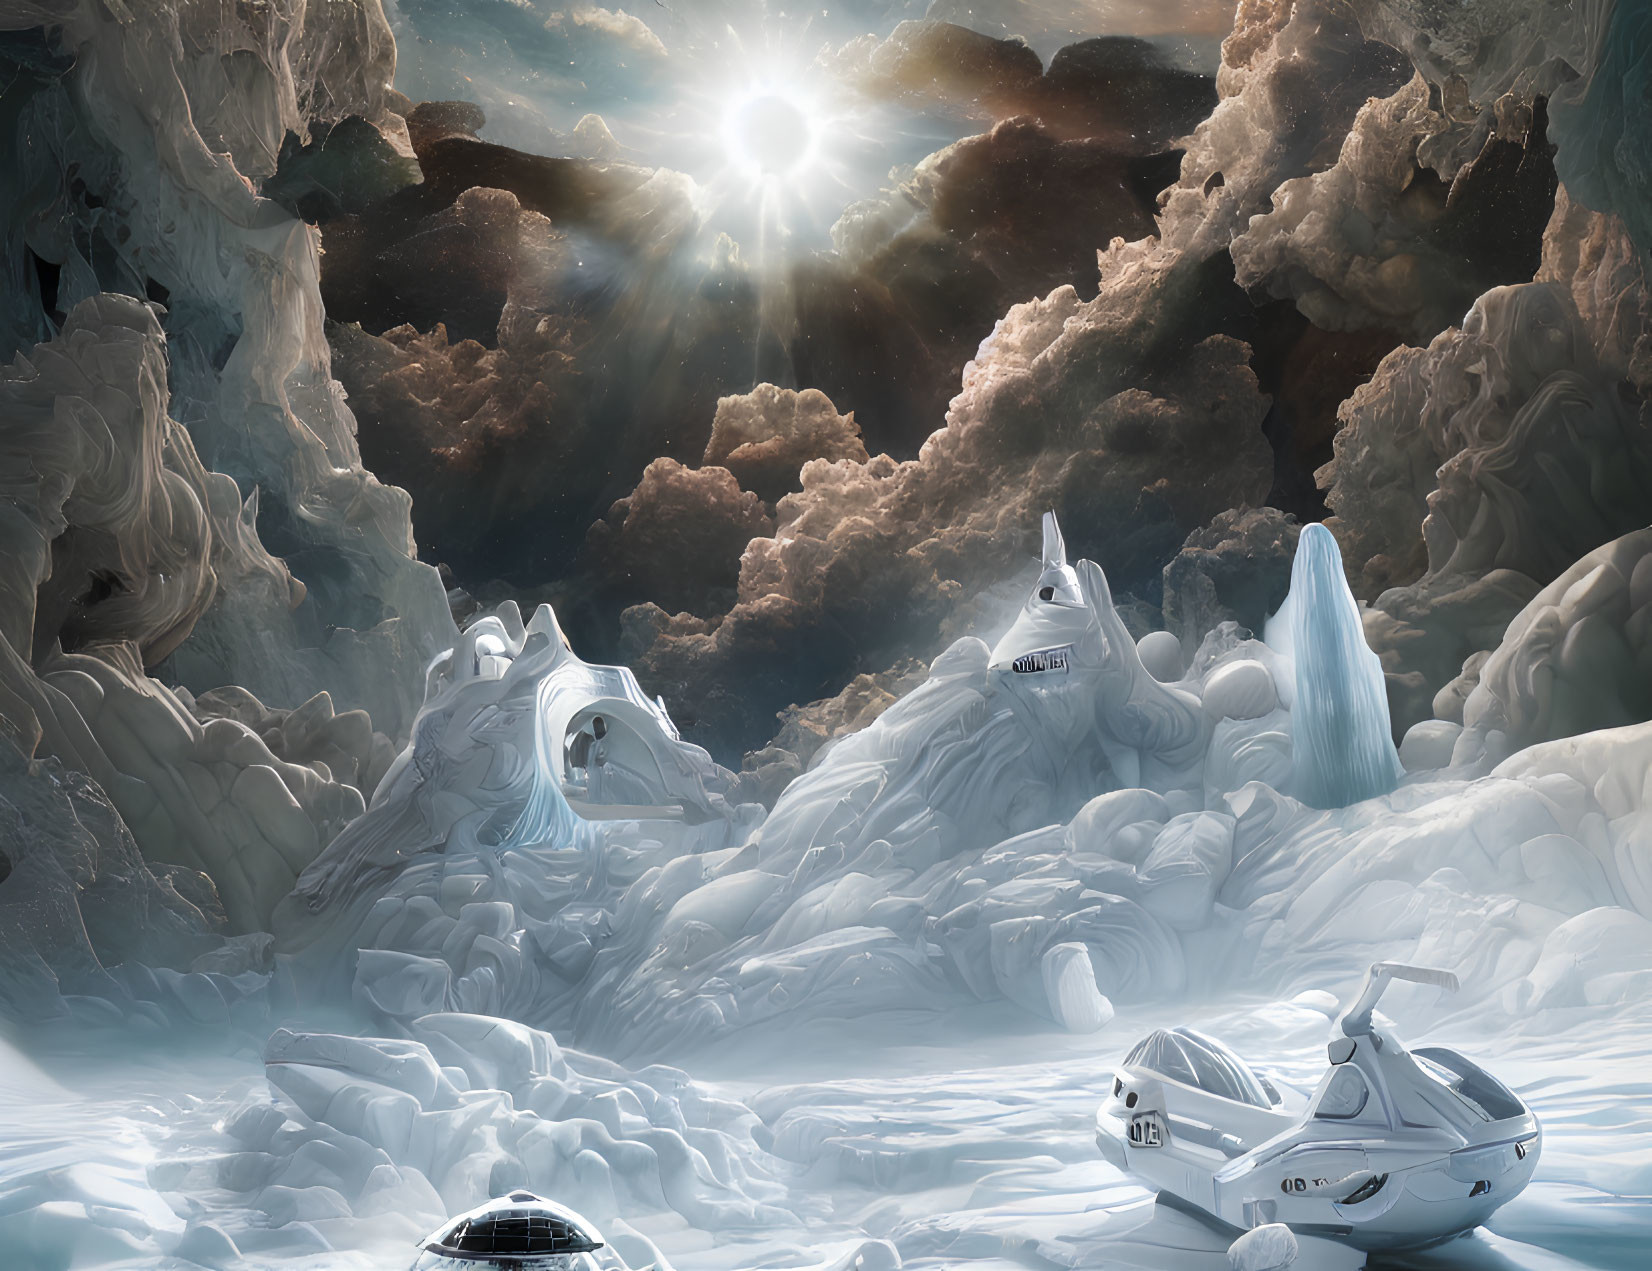 Fantastical icy landscape with futuristic vehicles and frozen horse head formations